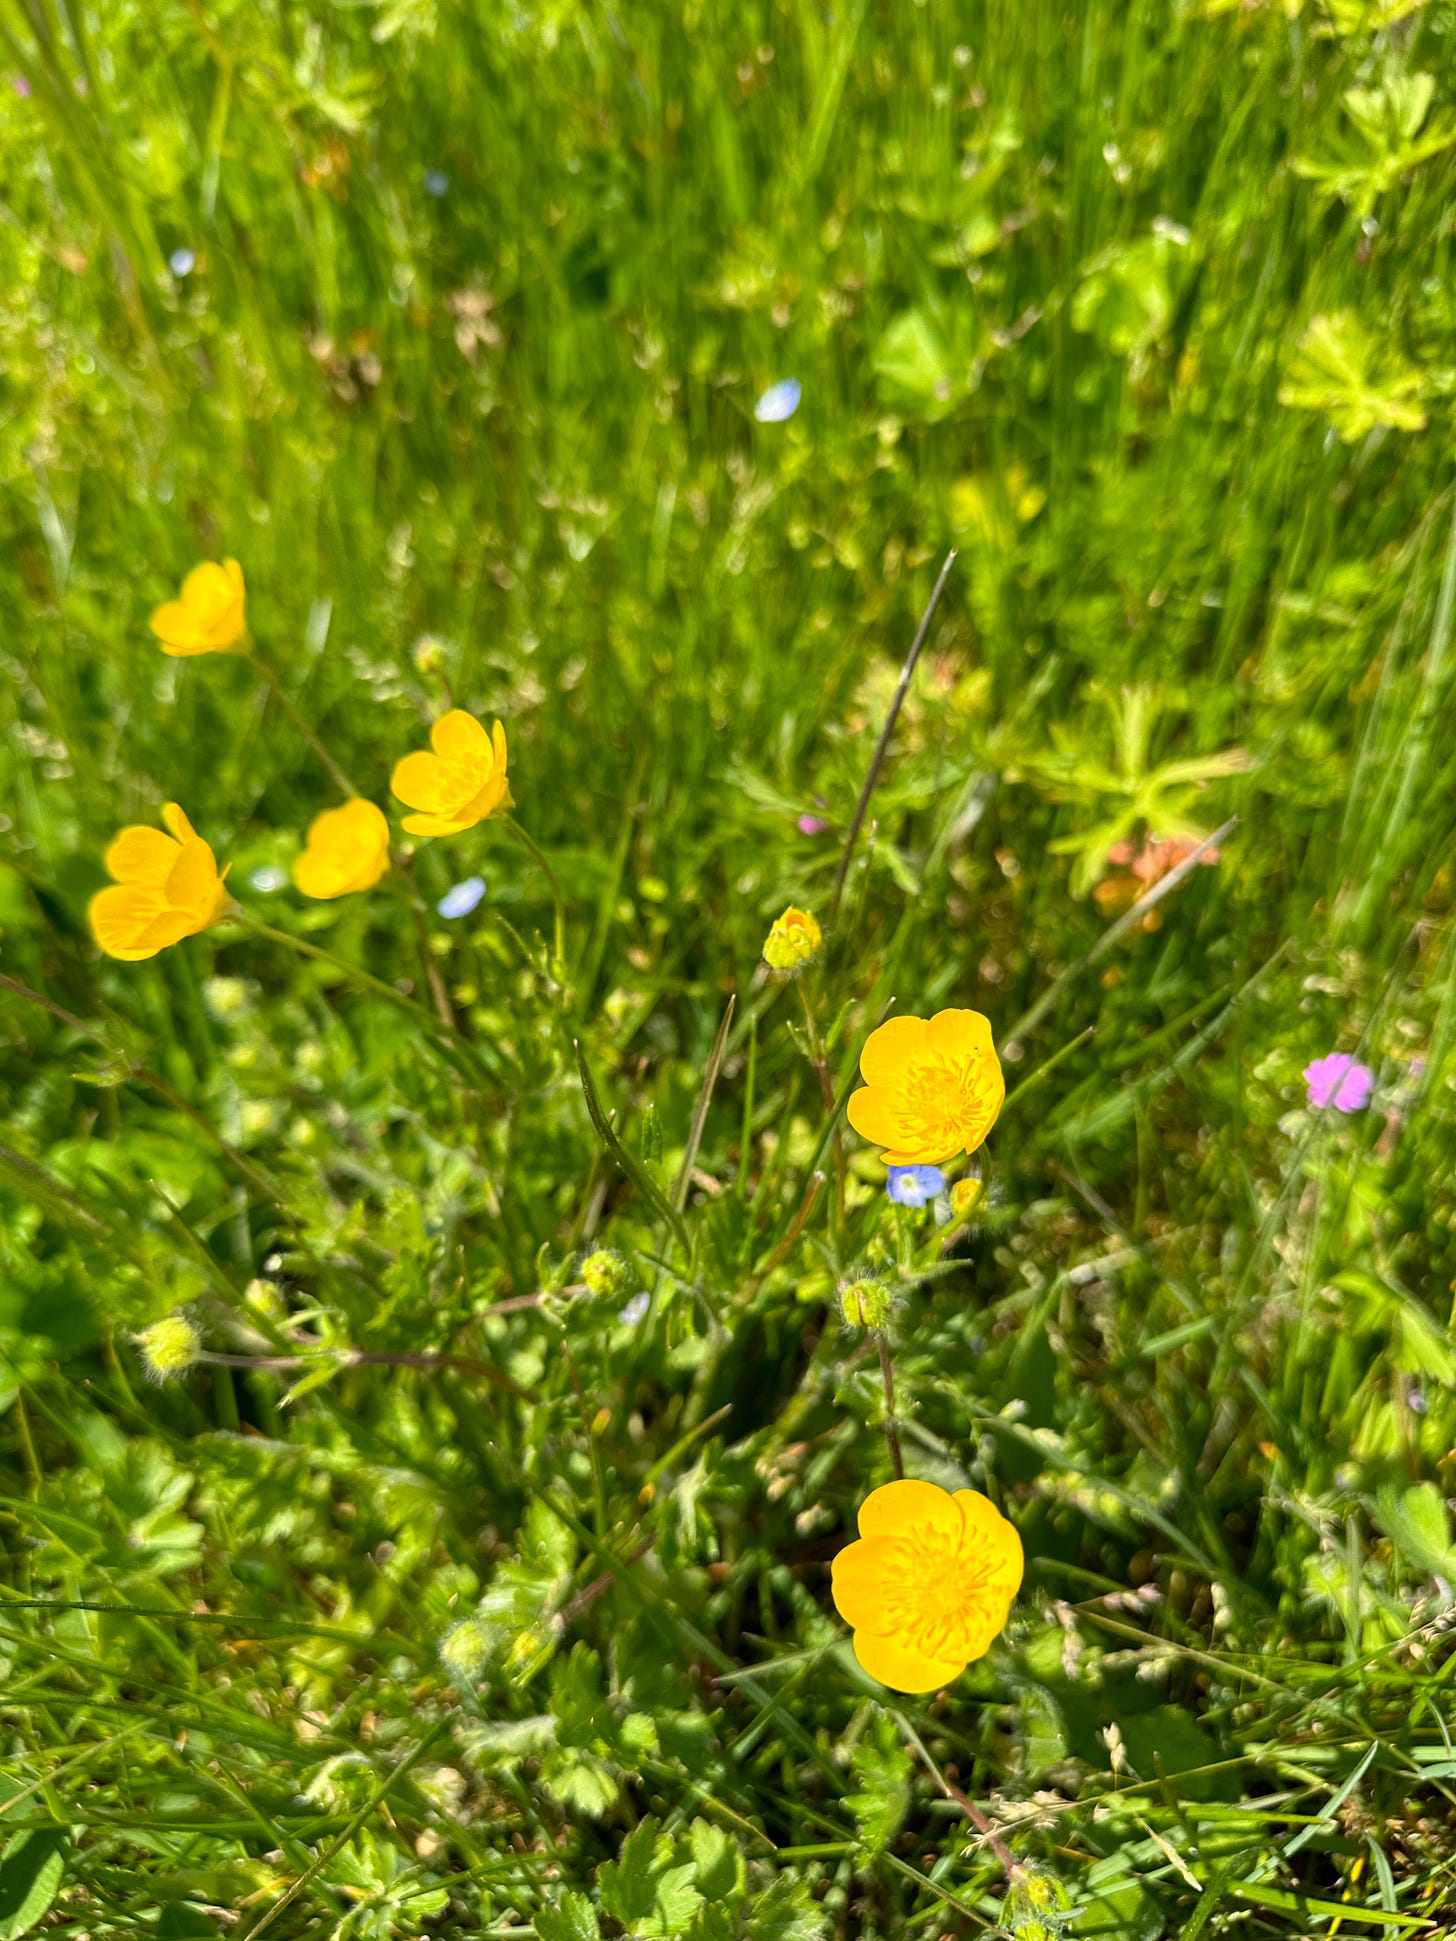 A cluster of buttercups in the midst of a grassy field.